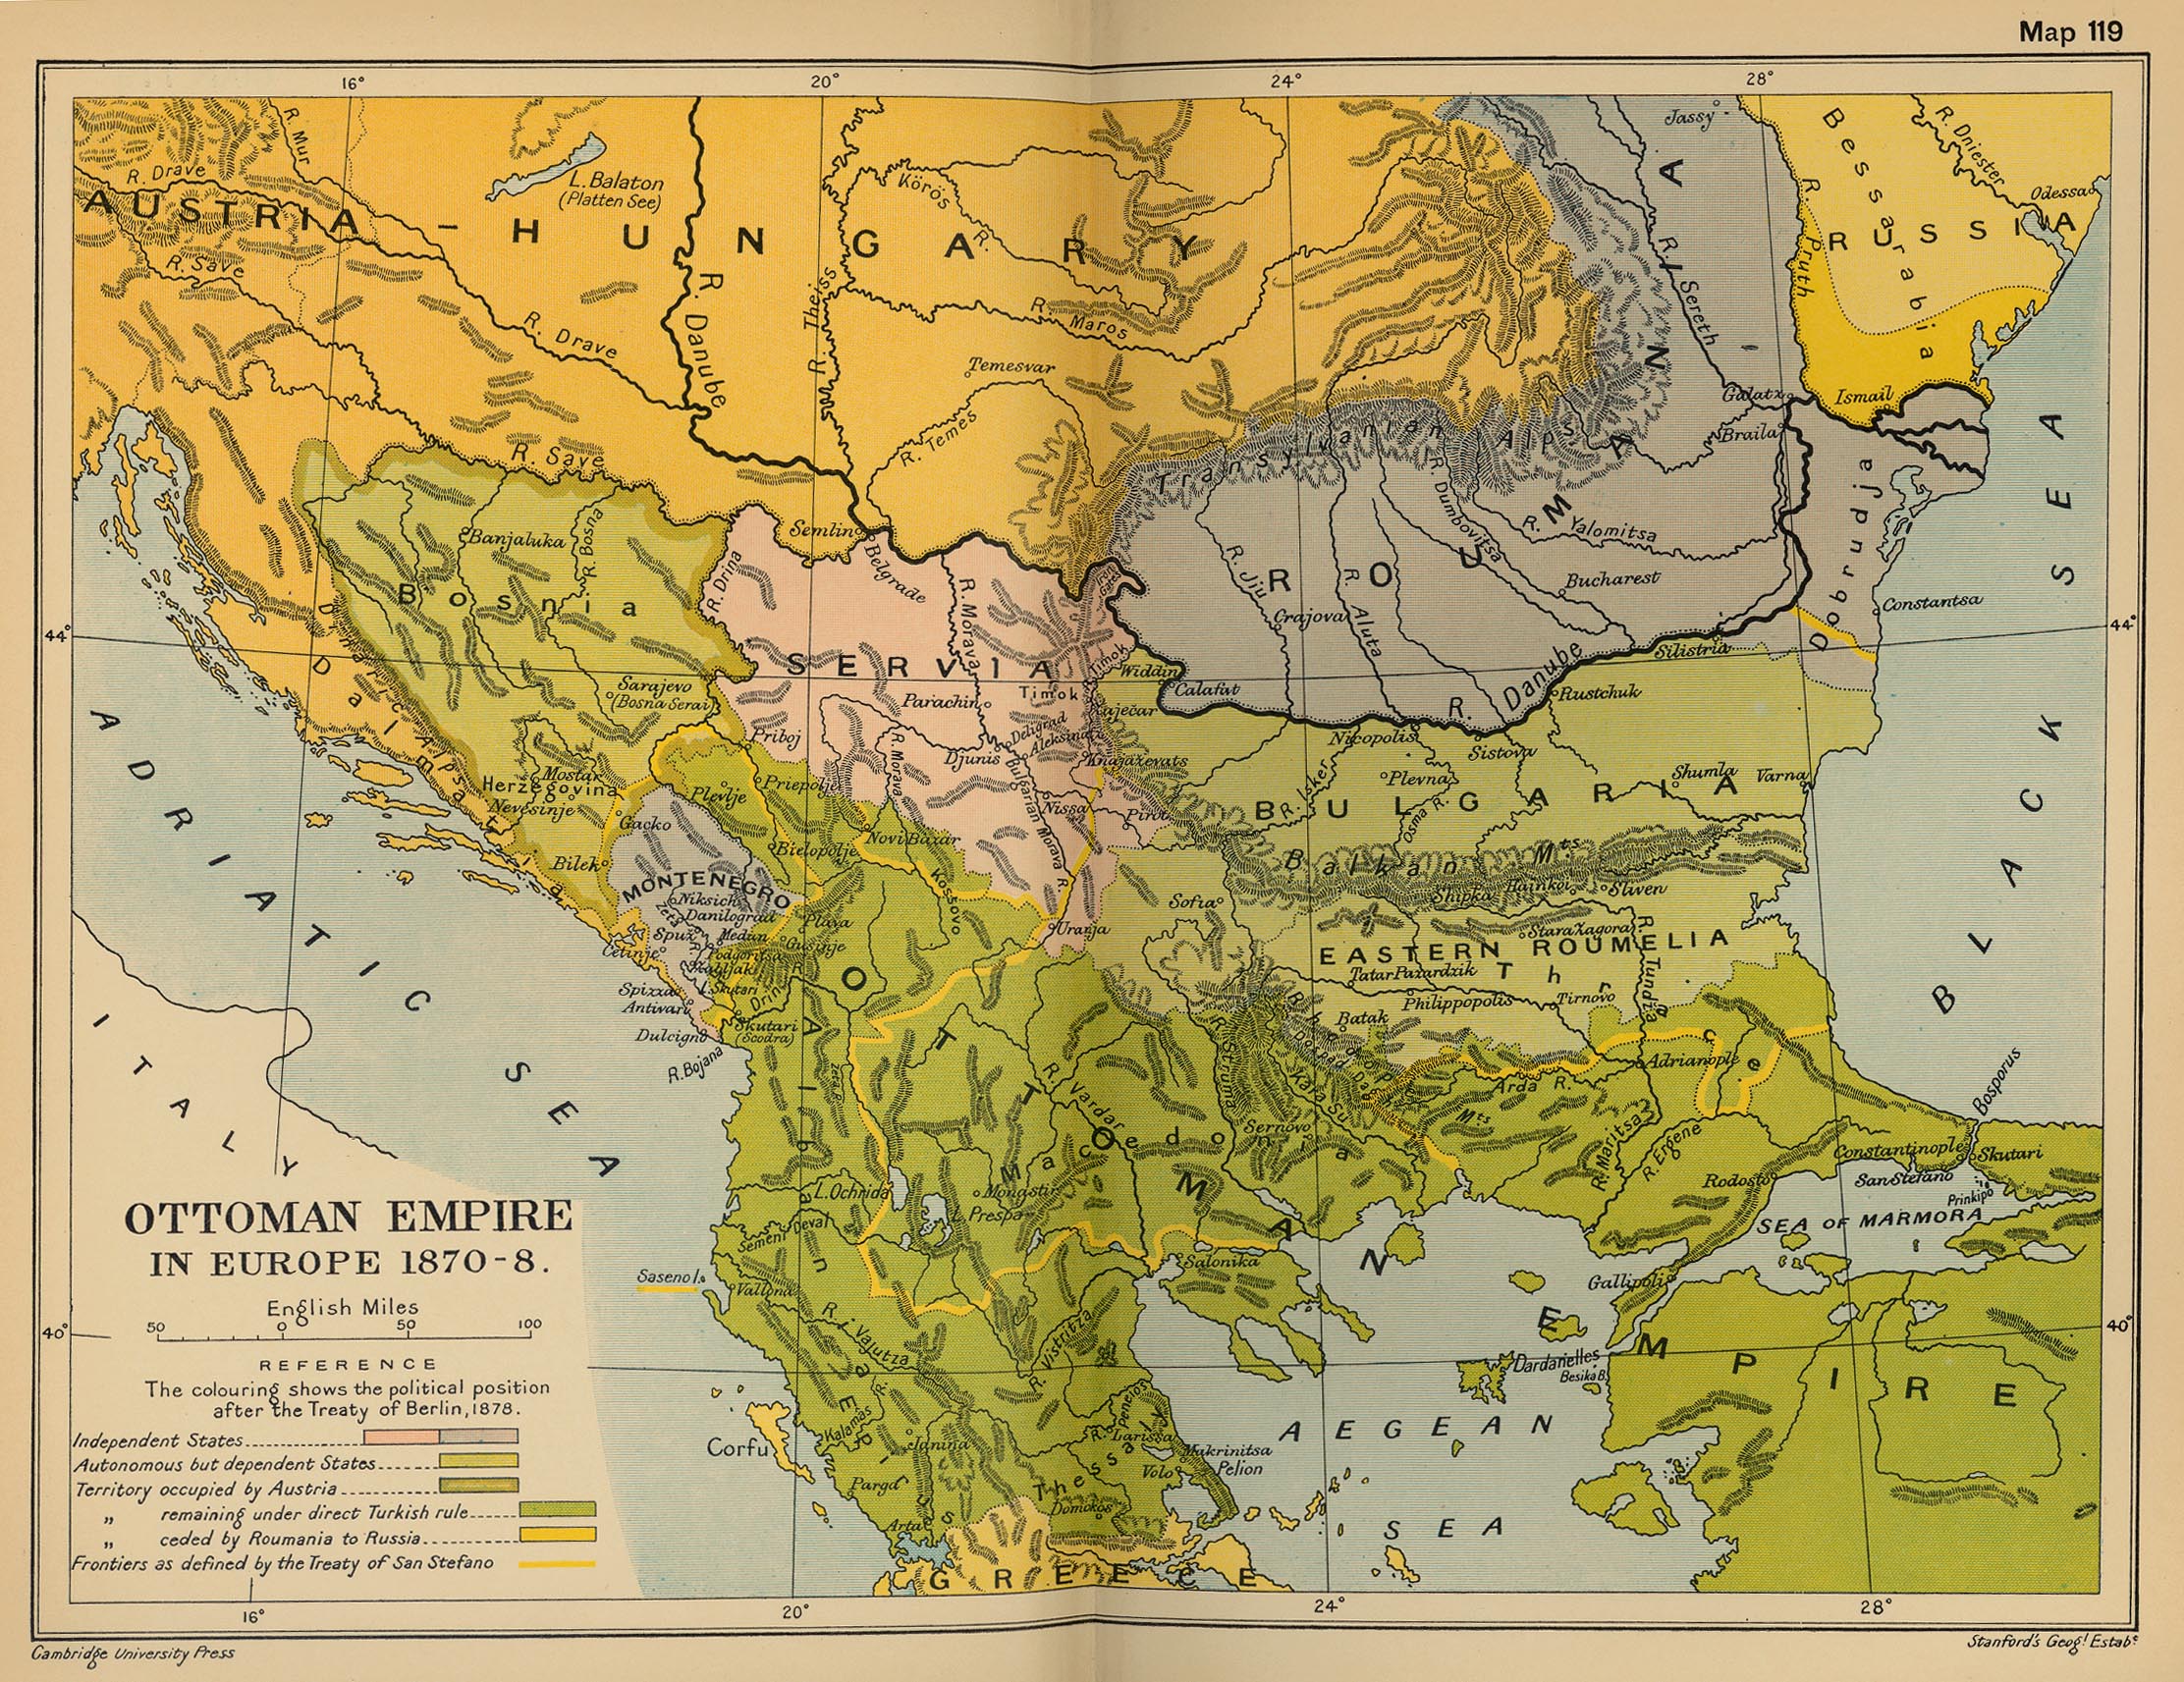 Map of the Ottoman Empire in Europe 1870-1878